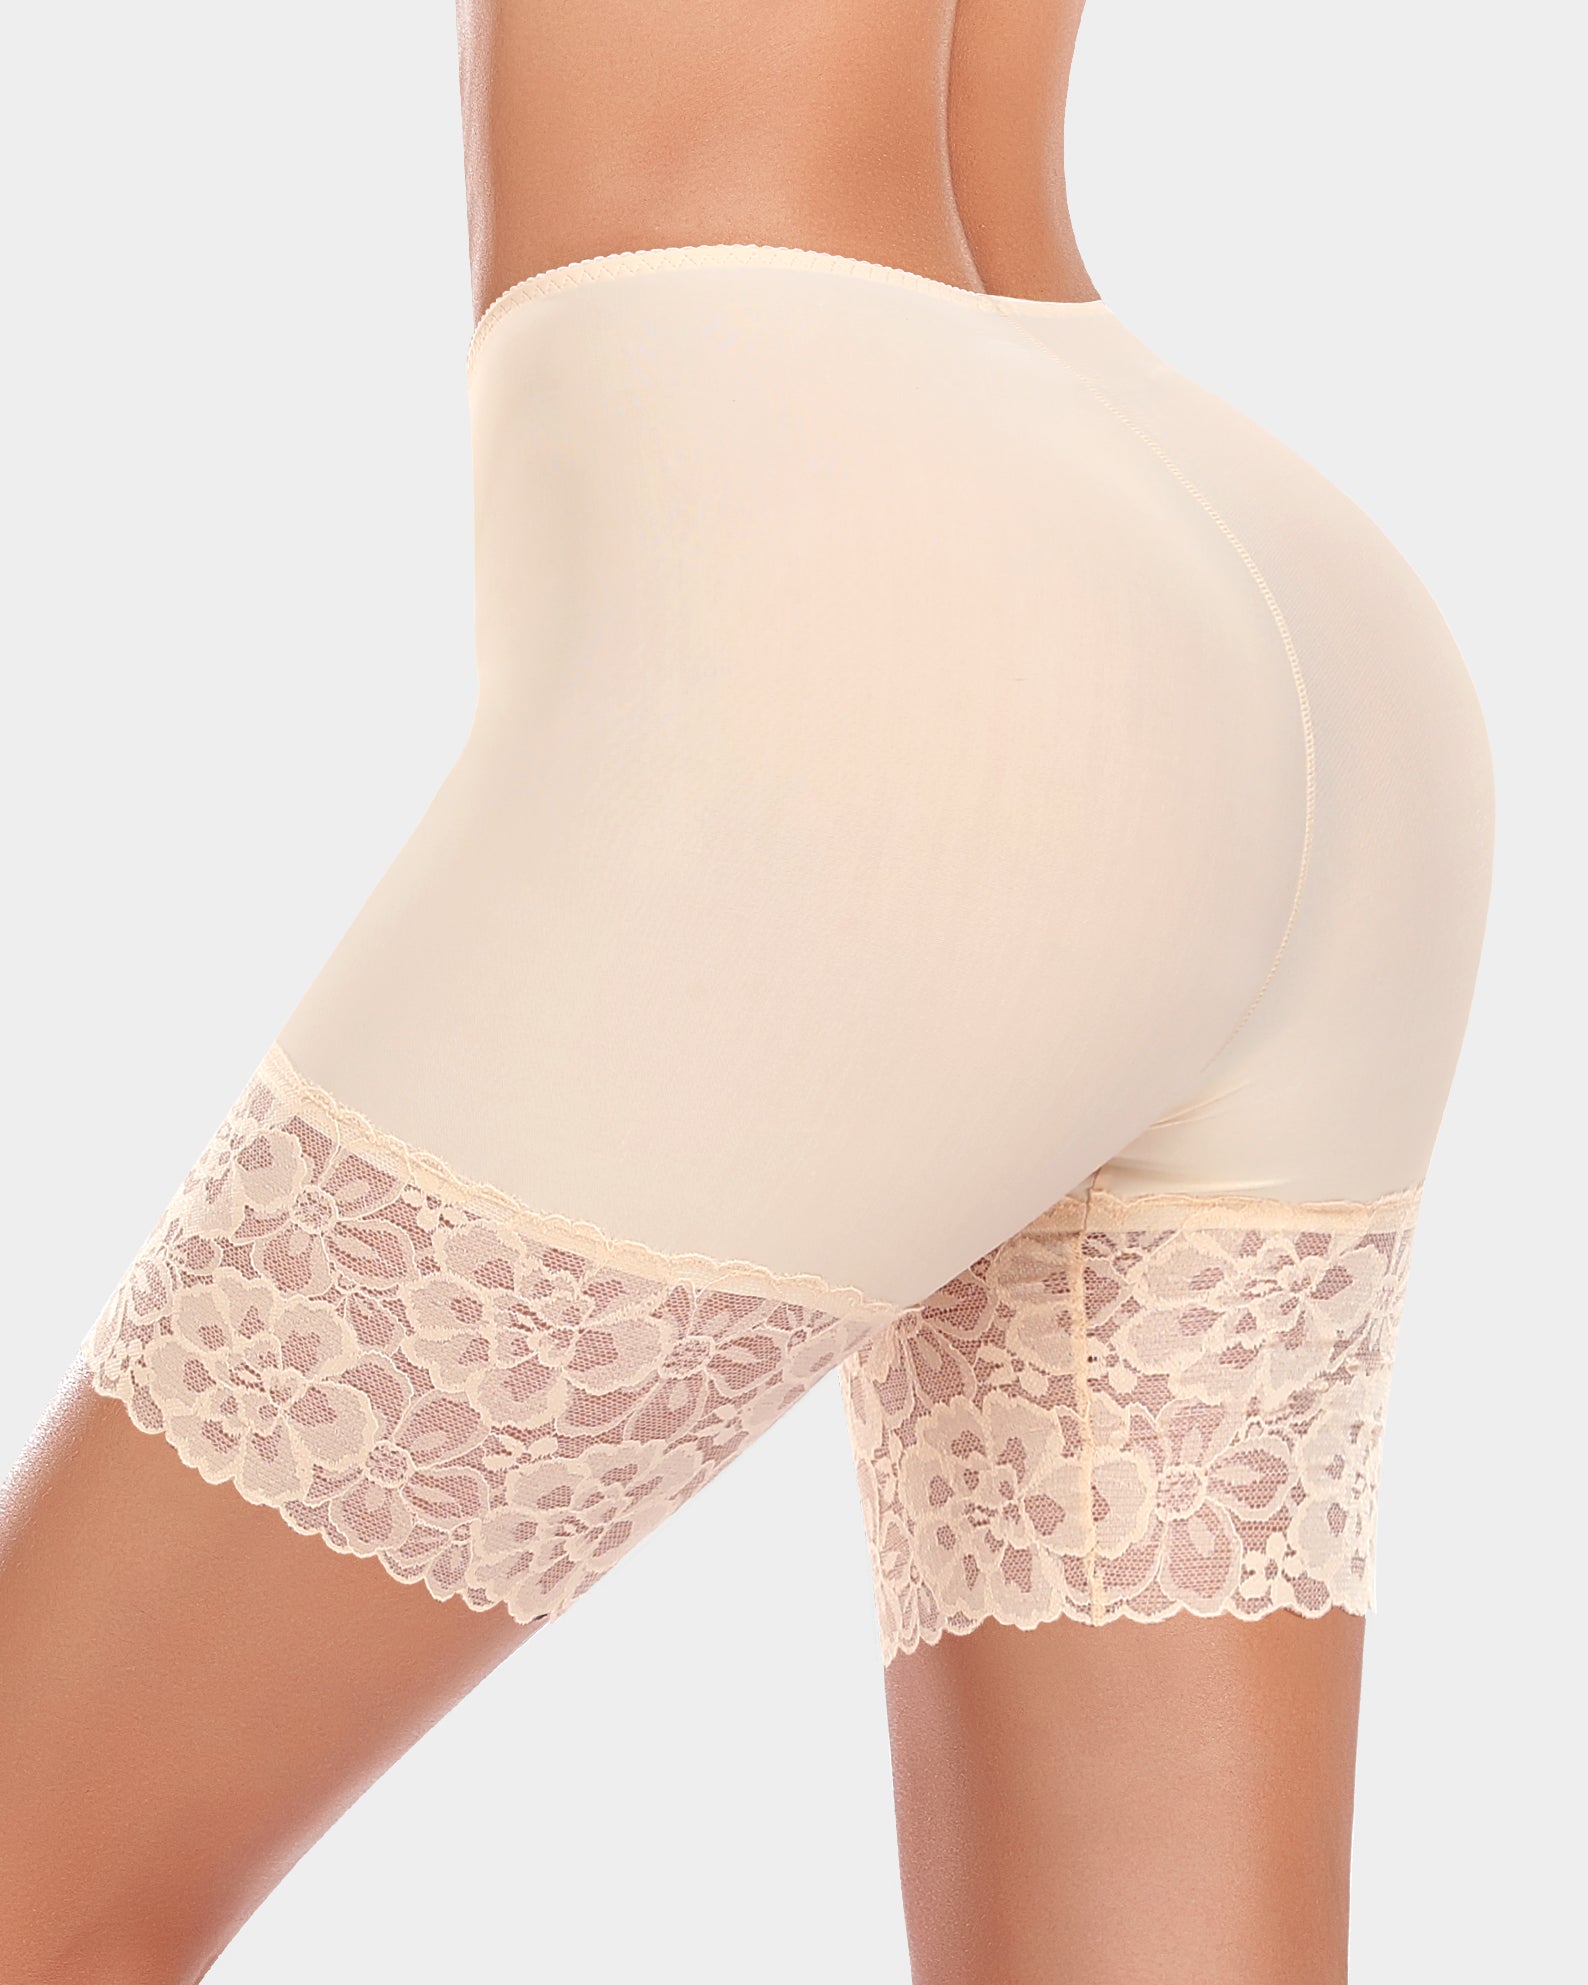 Mid-thigh Length Flower Lace Shaper Shorts